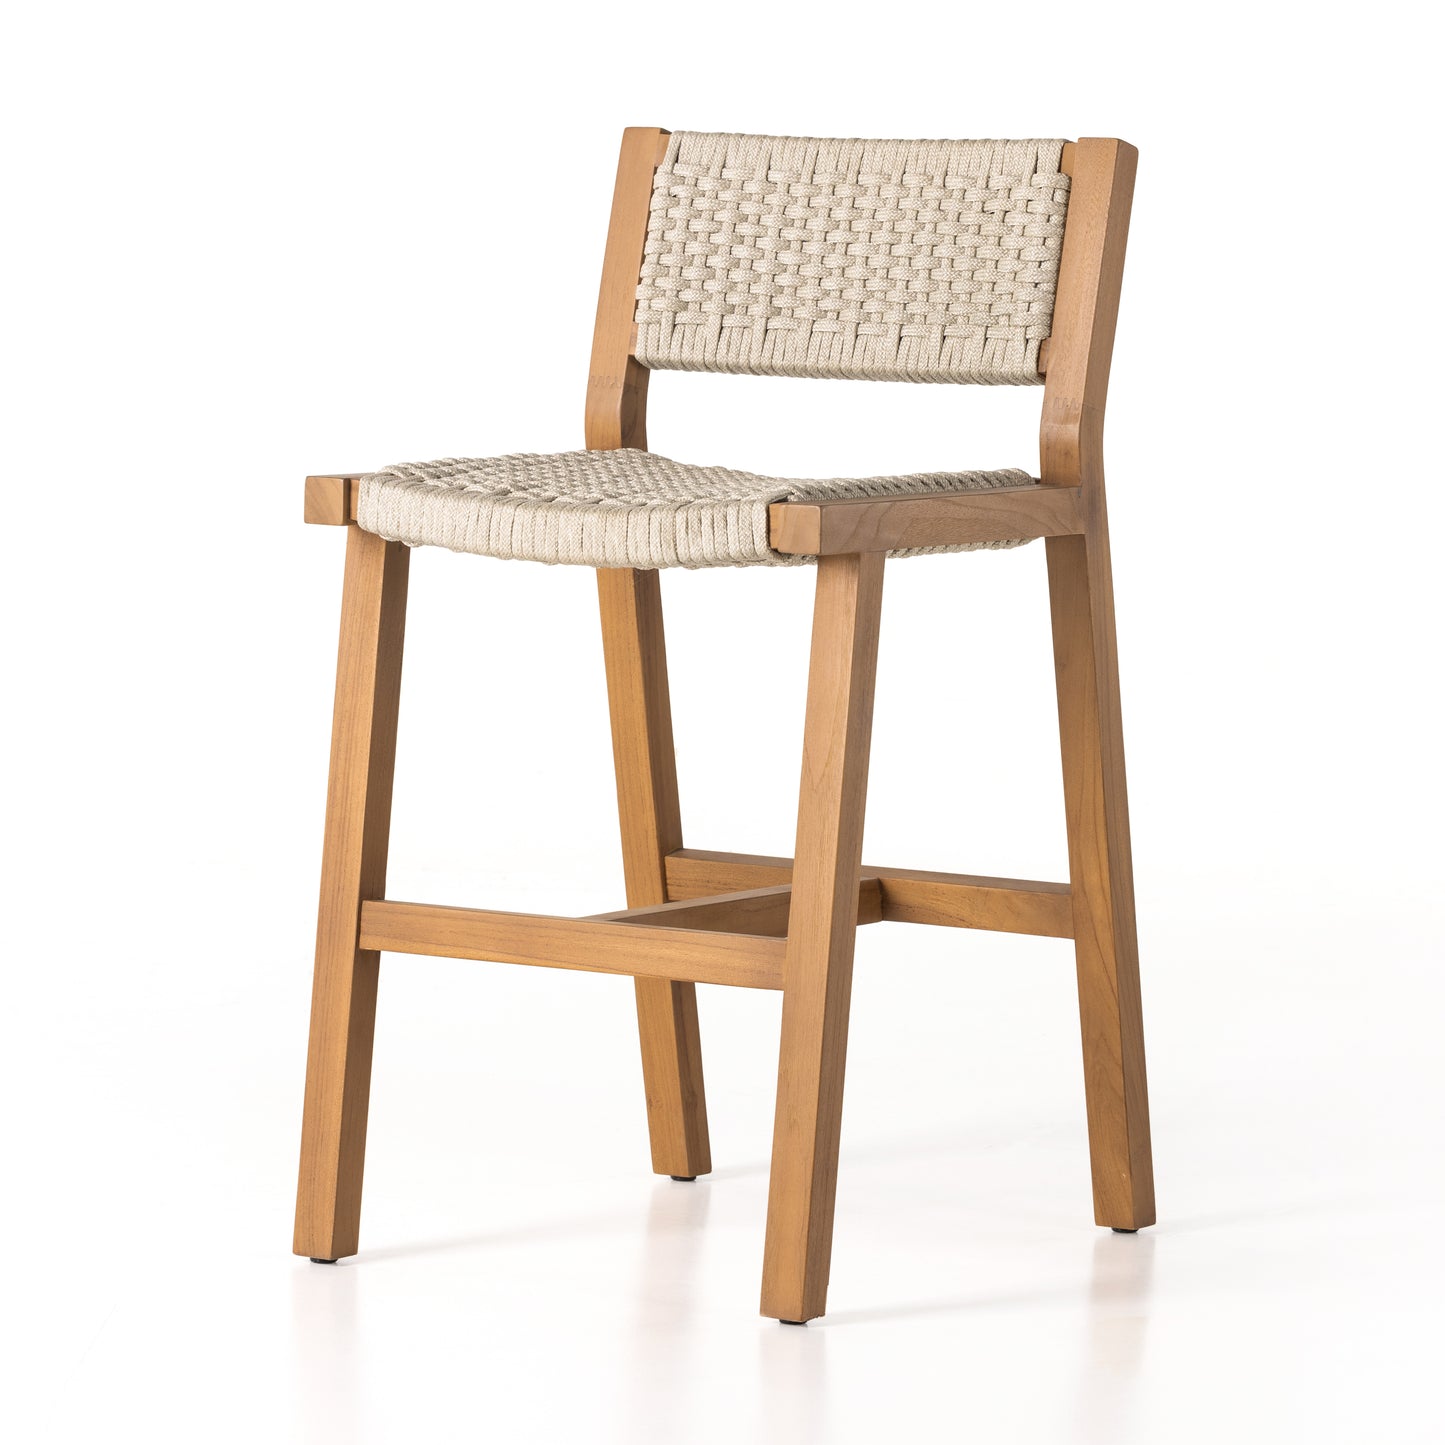 Load image into Gallery viewer, Delano Outdoor Bar + Counter Stool Counter / Natural TeakBAR AND COUNTER STOOL Four Hands  Counter Natural Teak  Four Hands, Mid Century Modern Furniture, Old Bones Furniture Company, Old Bones Co, Modern Mid Century, Designer Furniture, https://www.oldbonesco.com/
